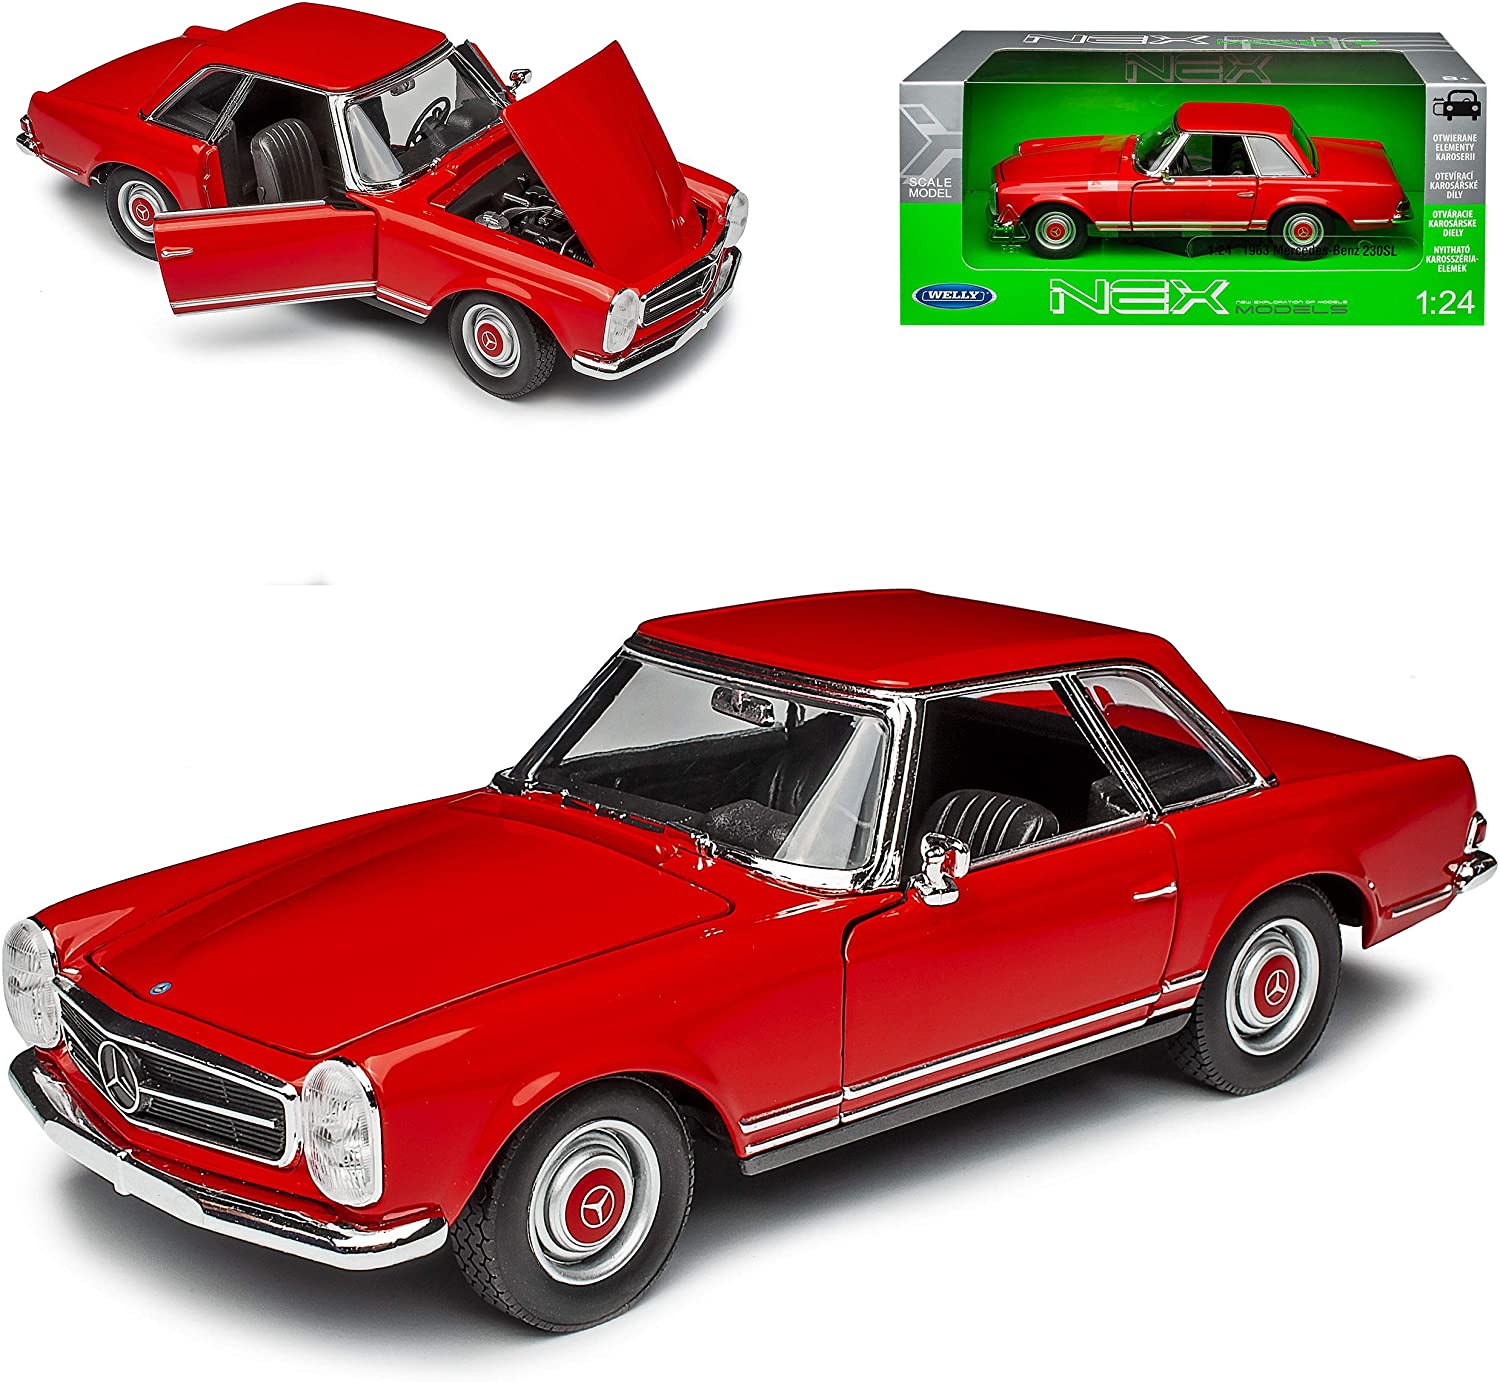 Mercedes-Benz 230Sl Pagoda Coupe Red W113 1963-1971 1/24 Welly Model Car Lp